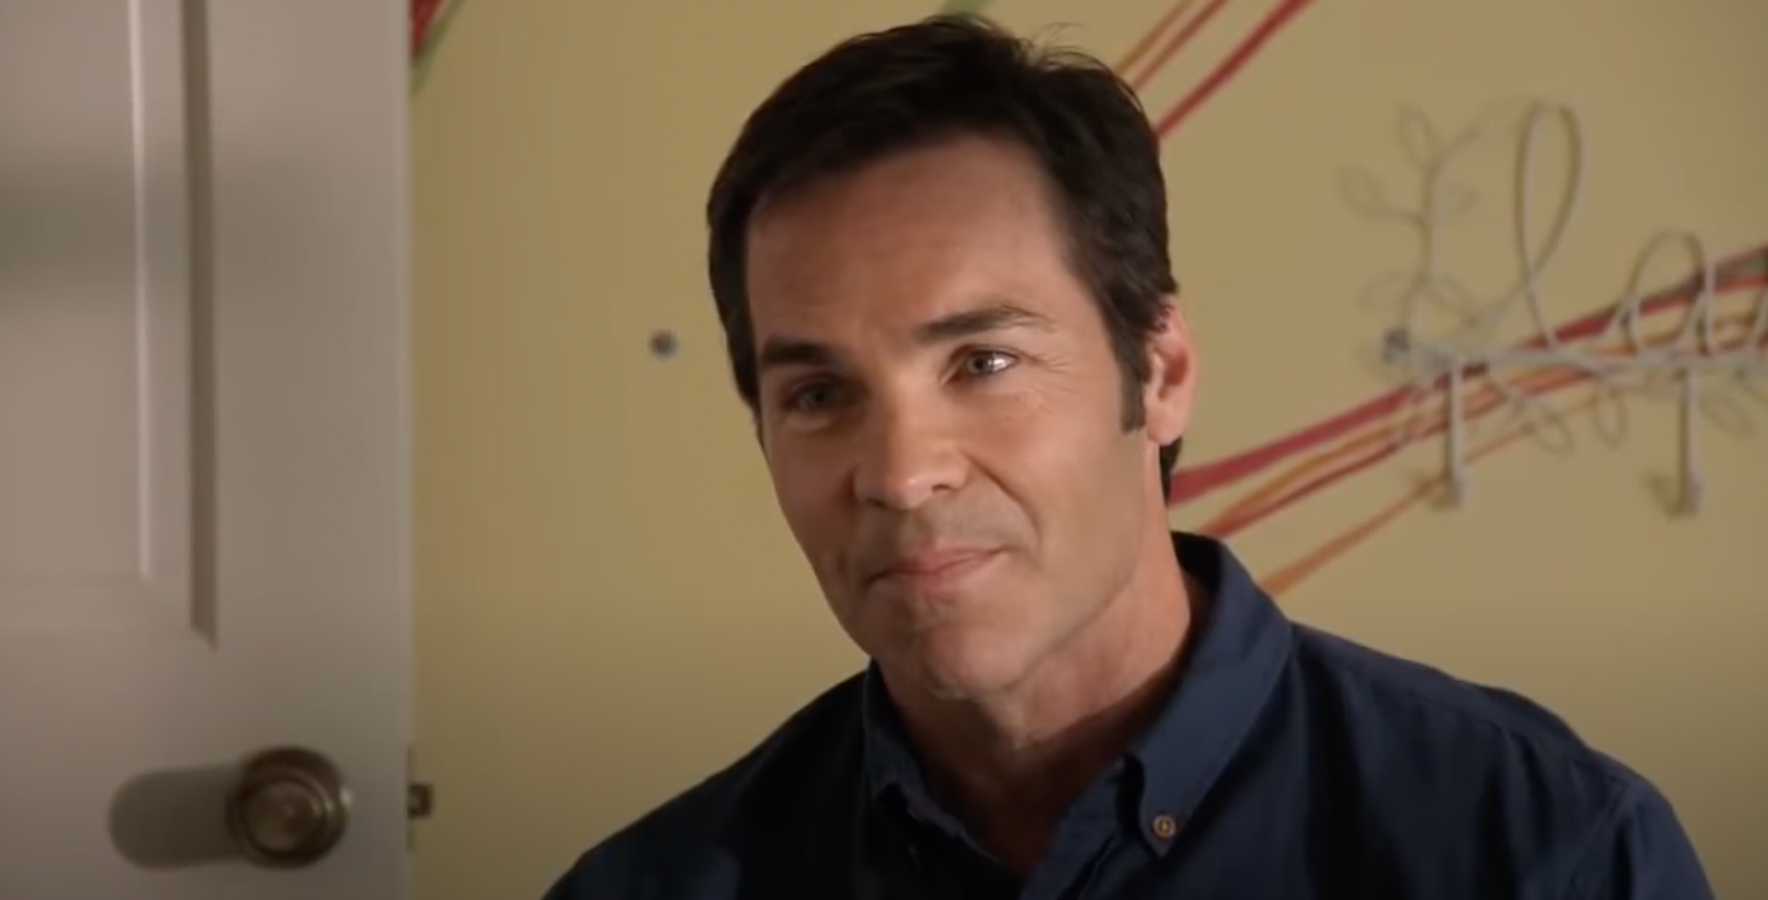 File: Jay Pickett seen here in the ‘A Matter of Faith’ movie